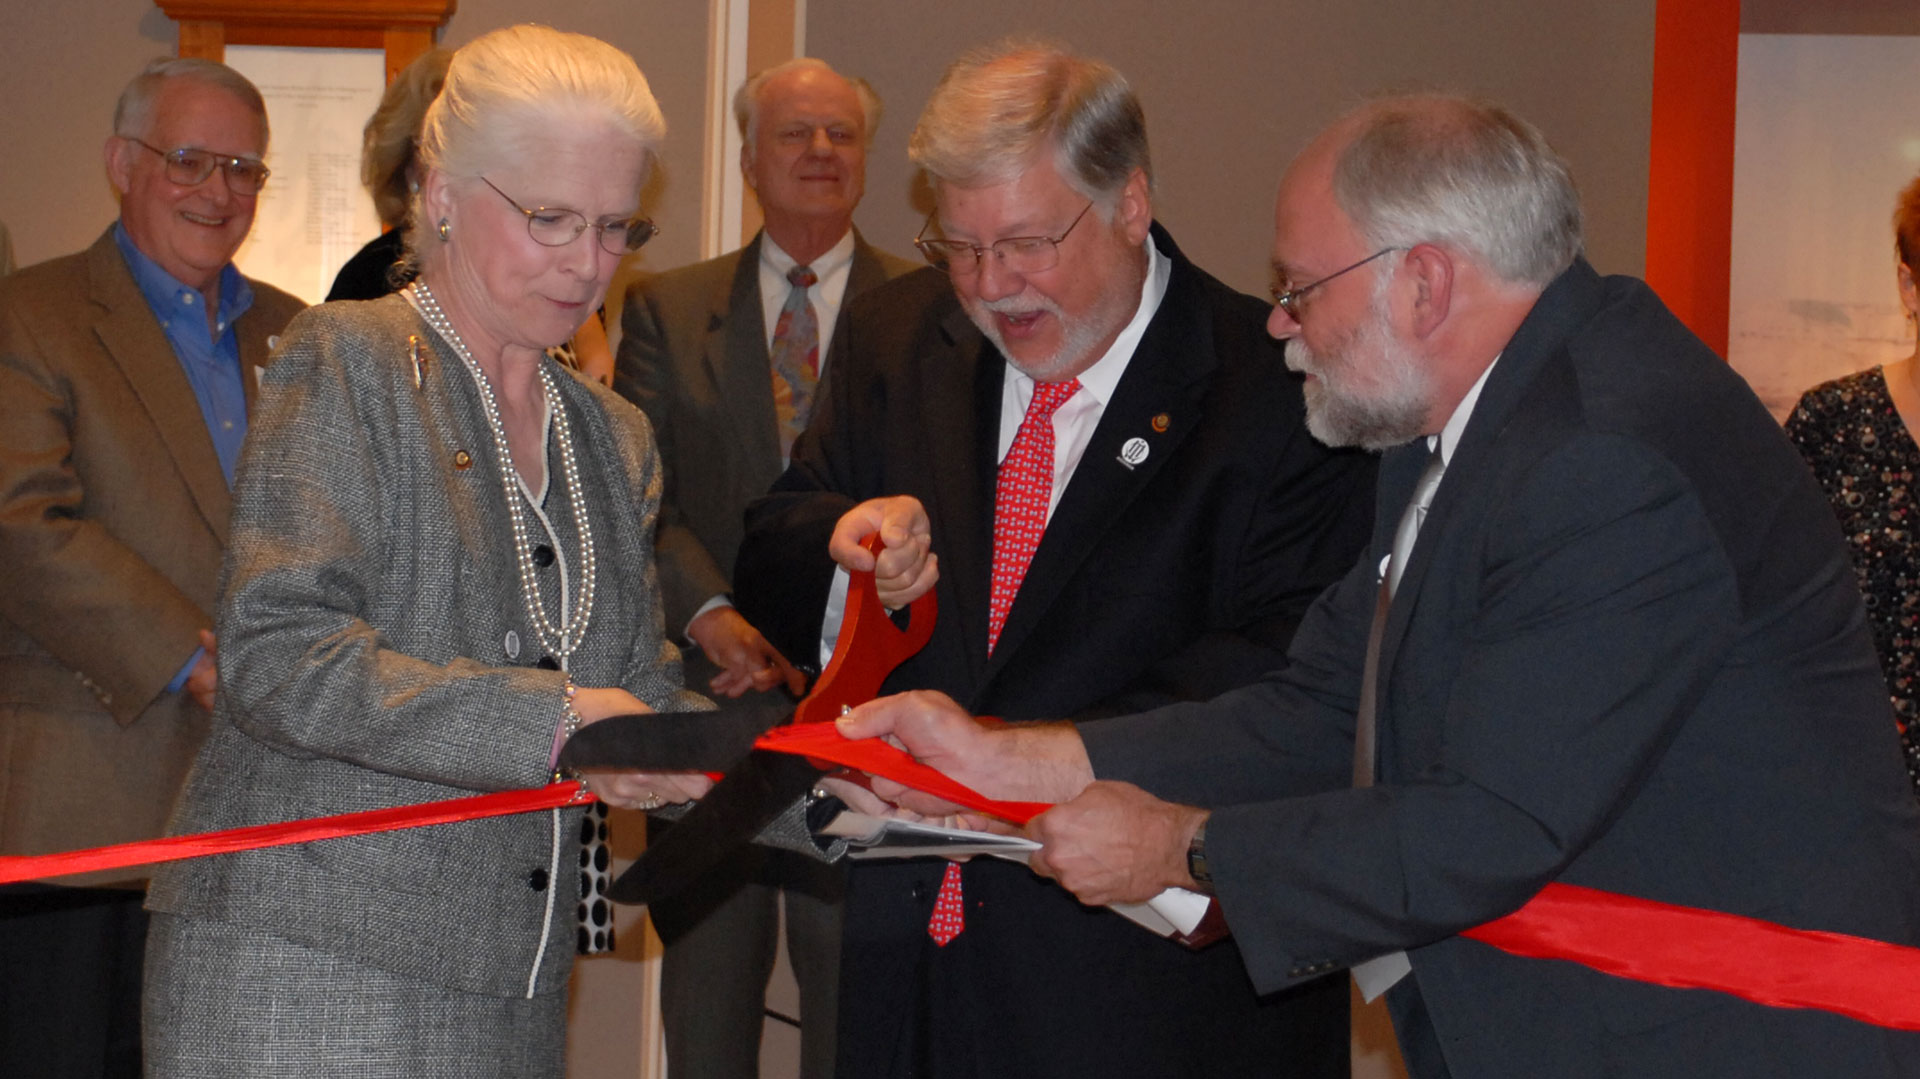 donors and Museum director cut red ribbon with large scissors